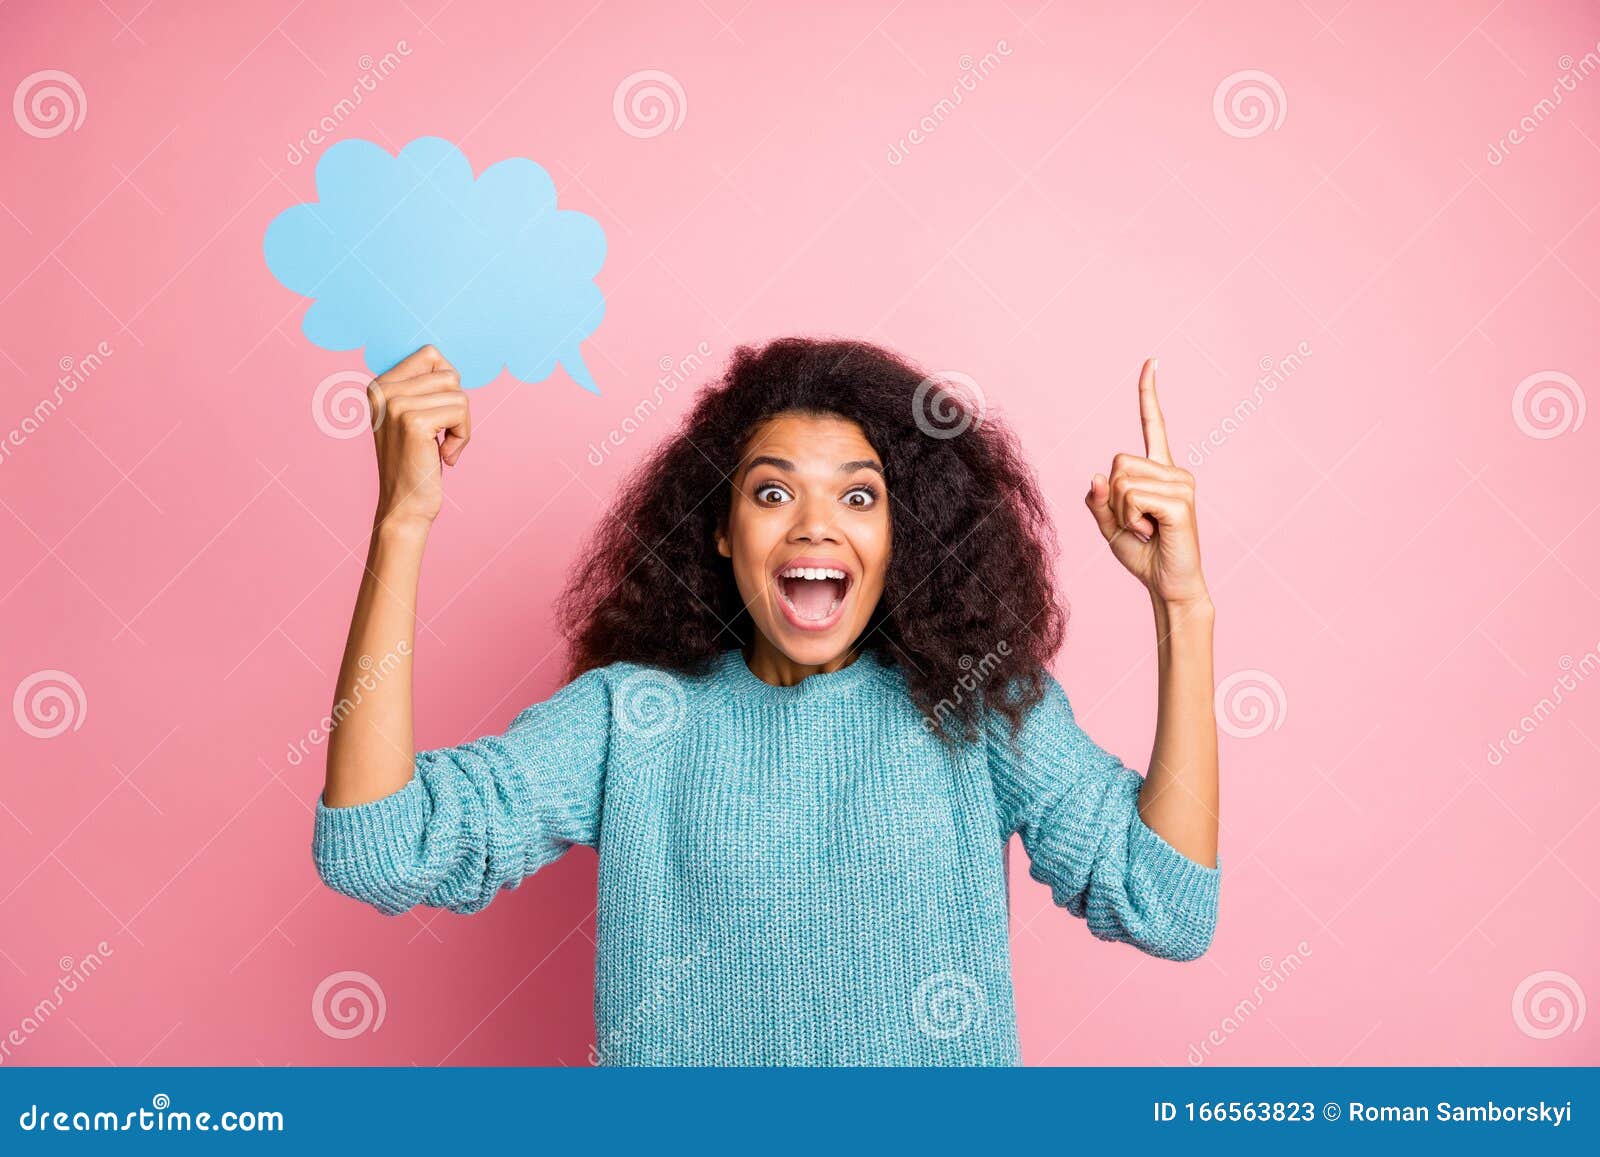 photo of excited cheerful pretty stylish trendy woman in blue jumper overjoyed about having found solution to her